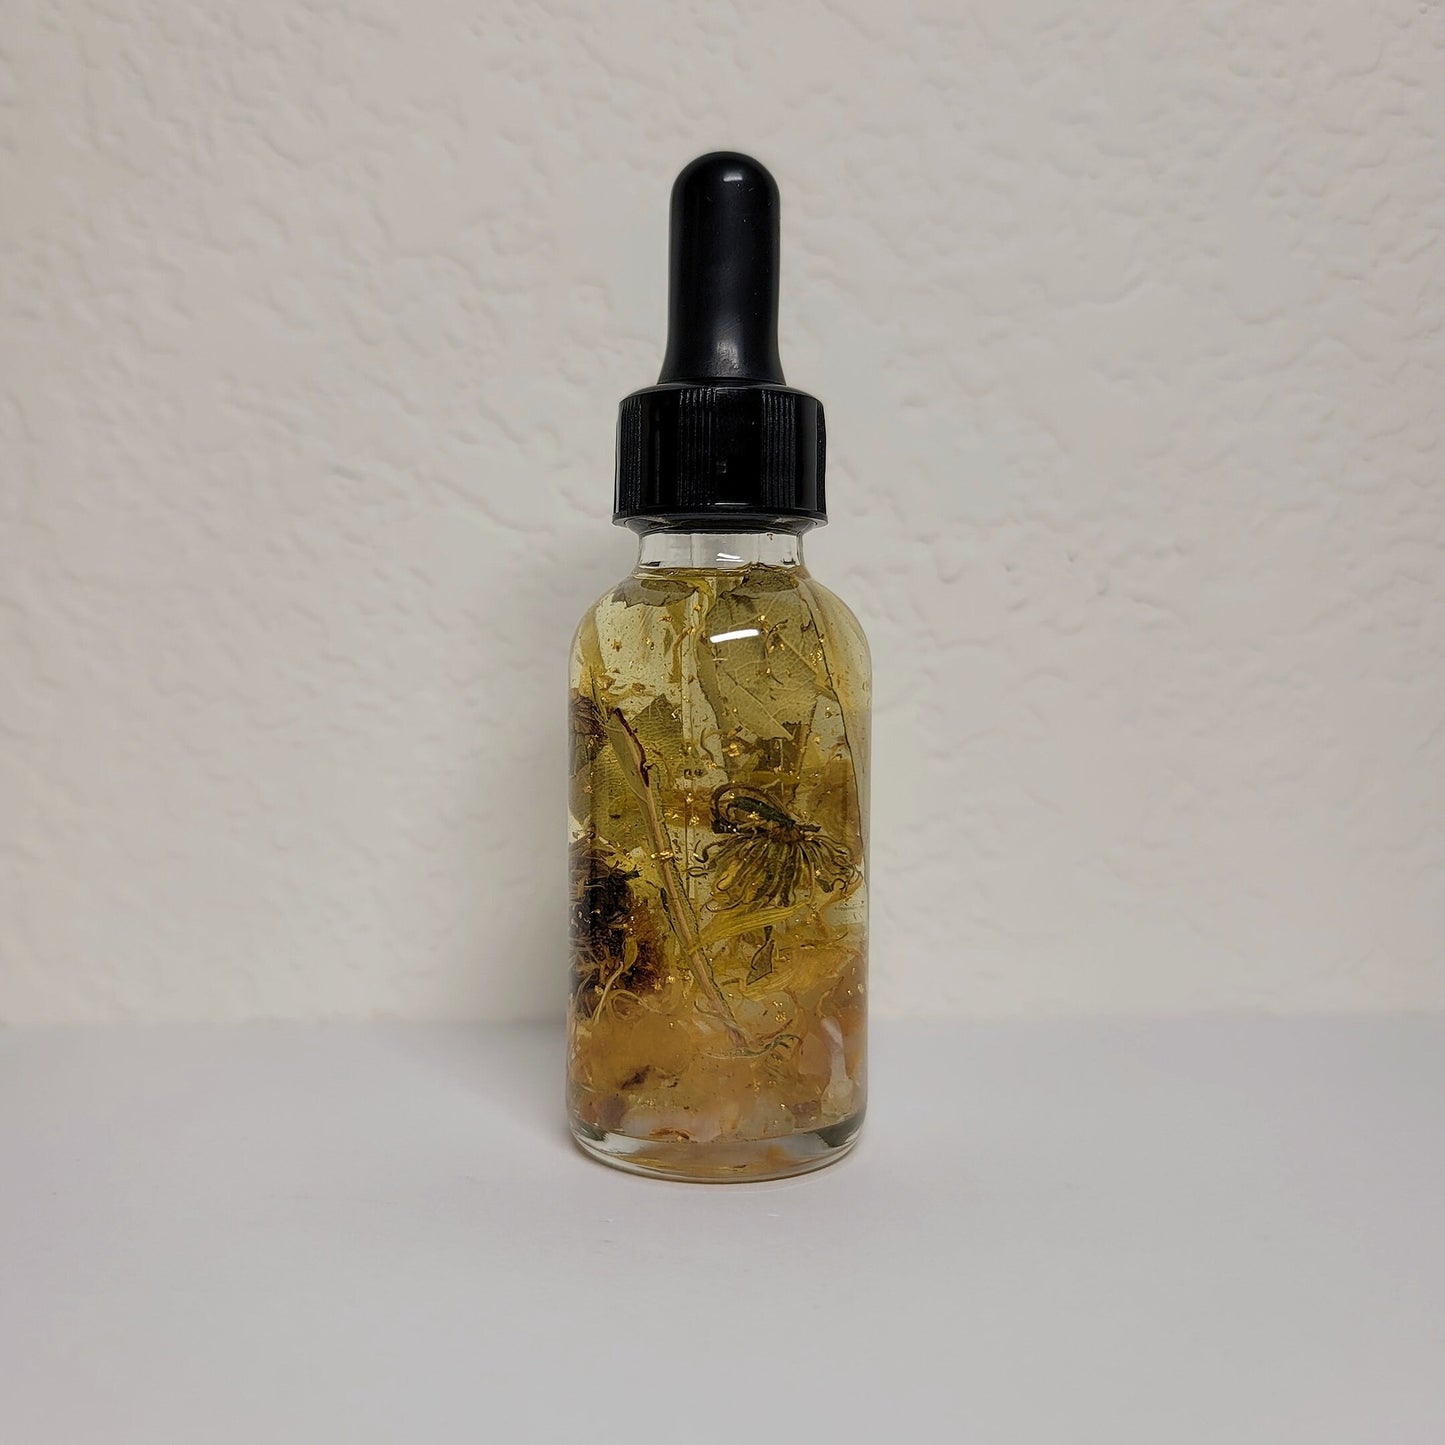 Apollo God Oil | Ritual & Spell Work, Altars, Invocation, Manifestation, and Intentions